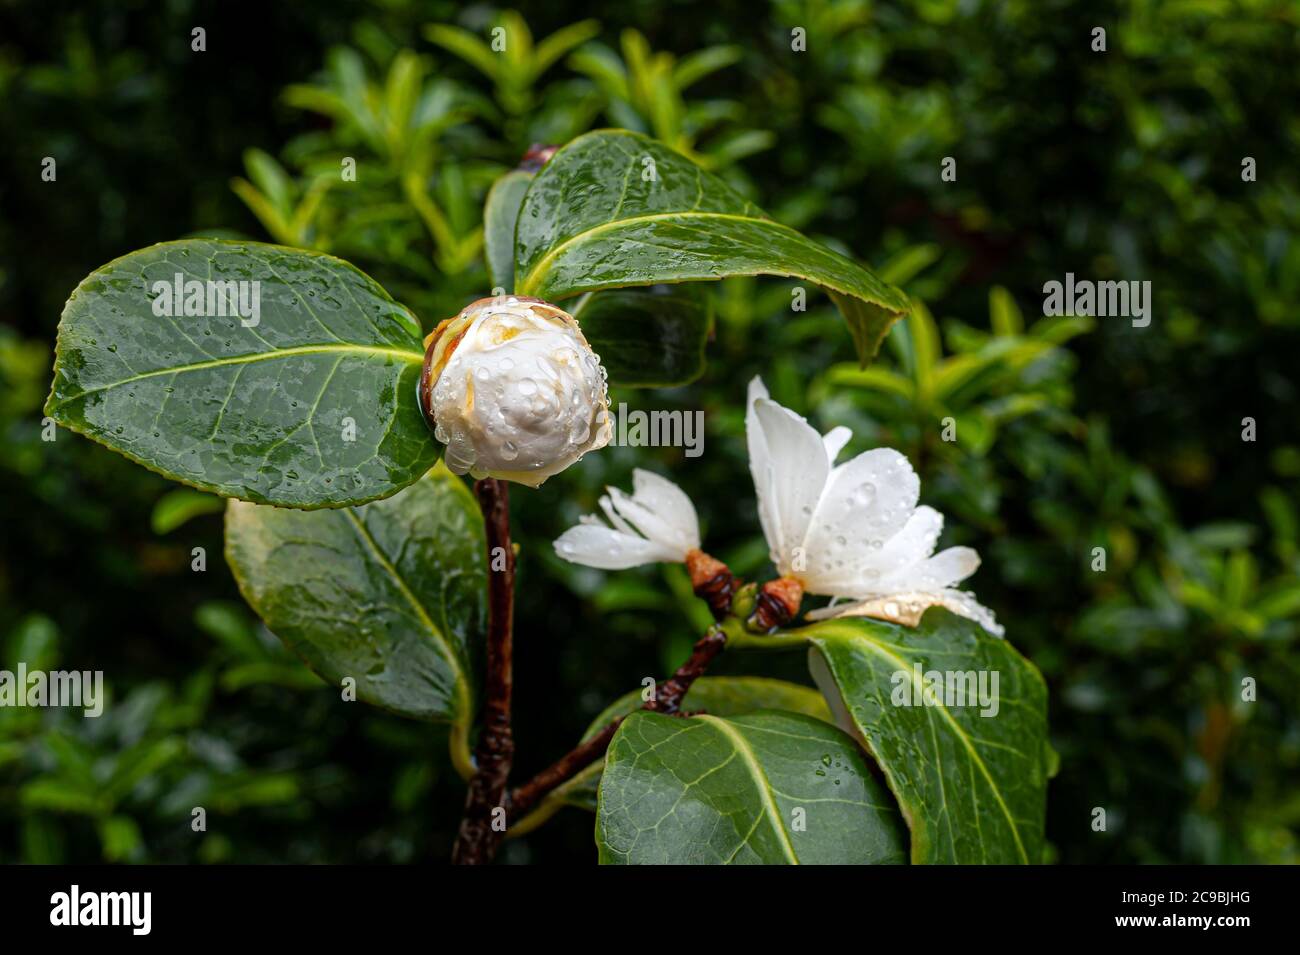 Blooming White Camelia Japonica against a background of blurry green leaves after rainy day. Stock Photo